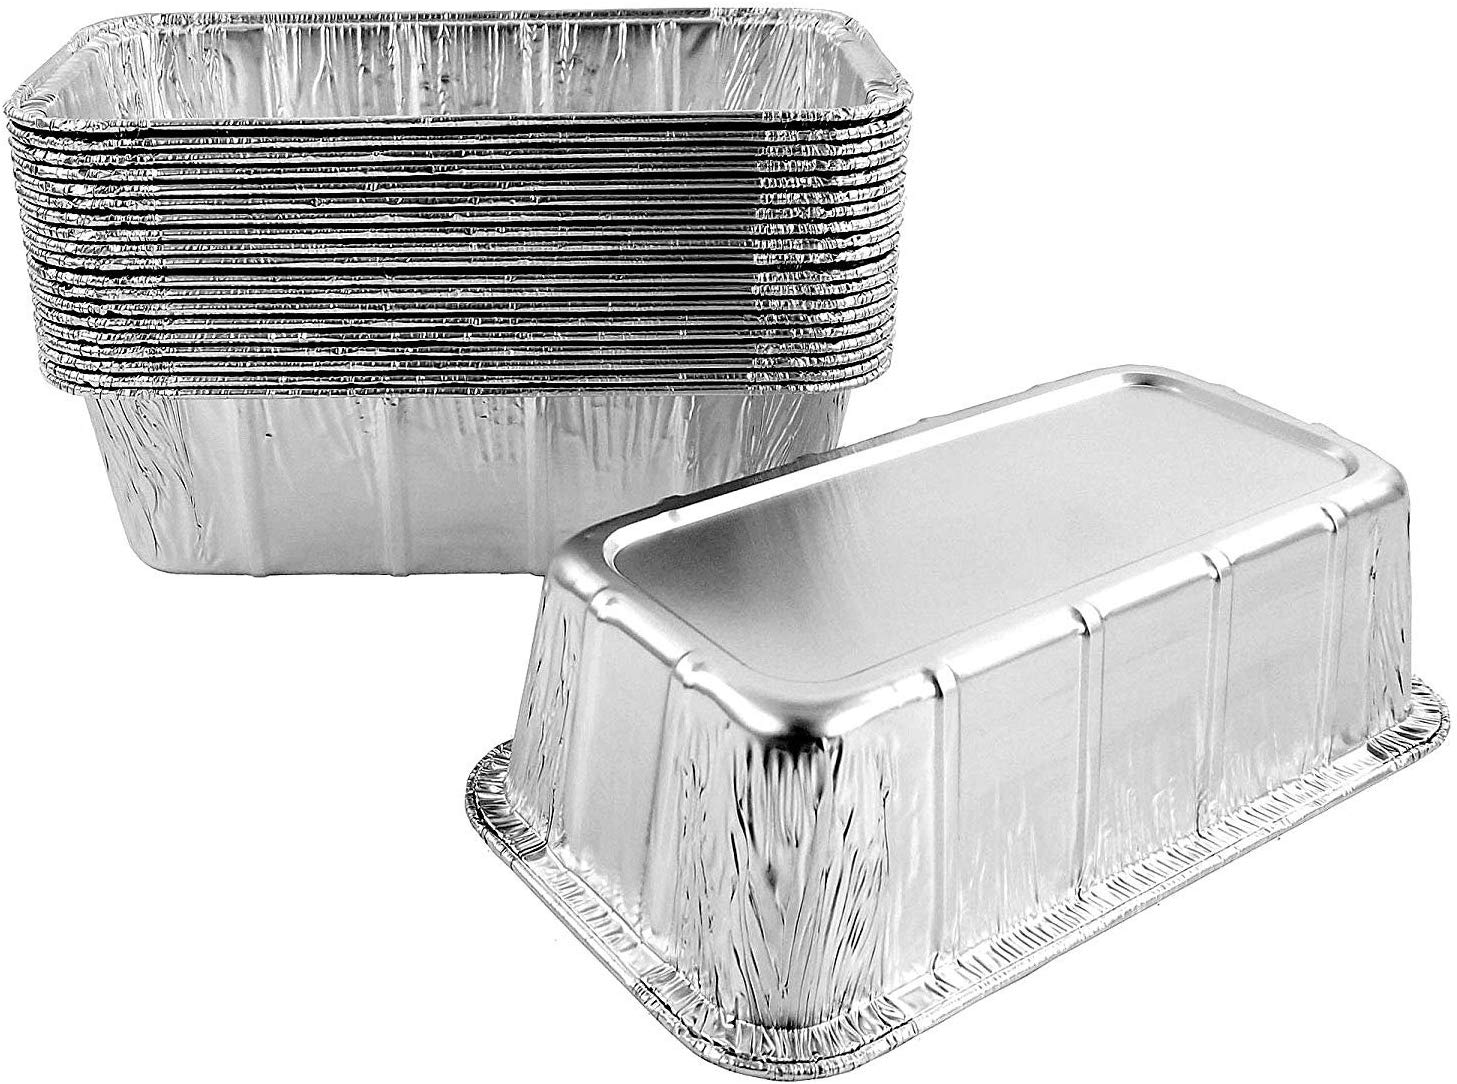 DDI 2269694 Aluminum 1 lb. Loaf Pan - Nicole Home Collection Case of 200,  200 - Fry's Food Stores